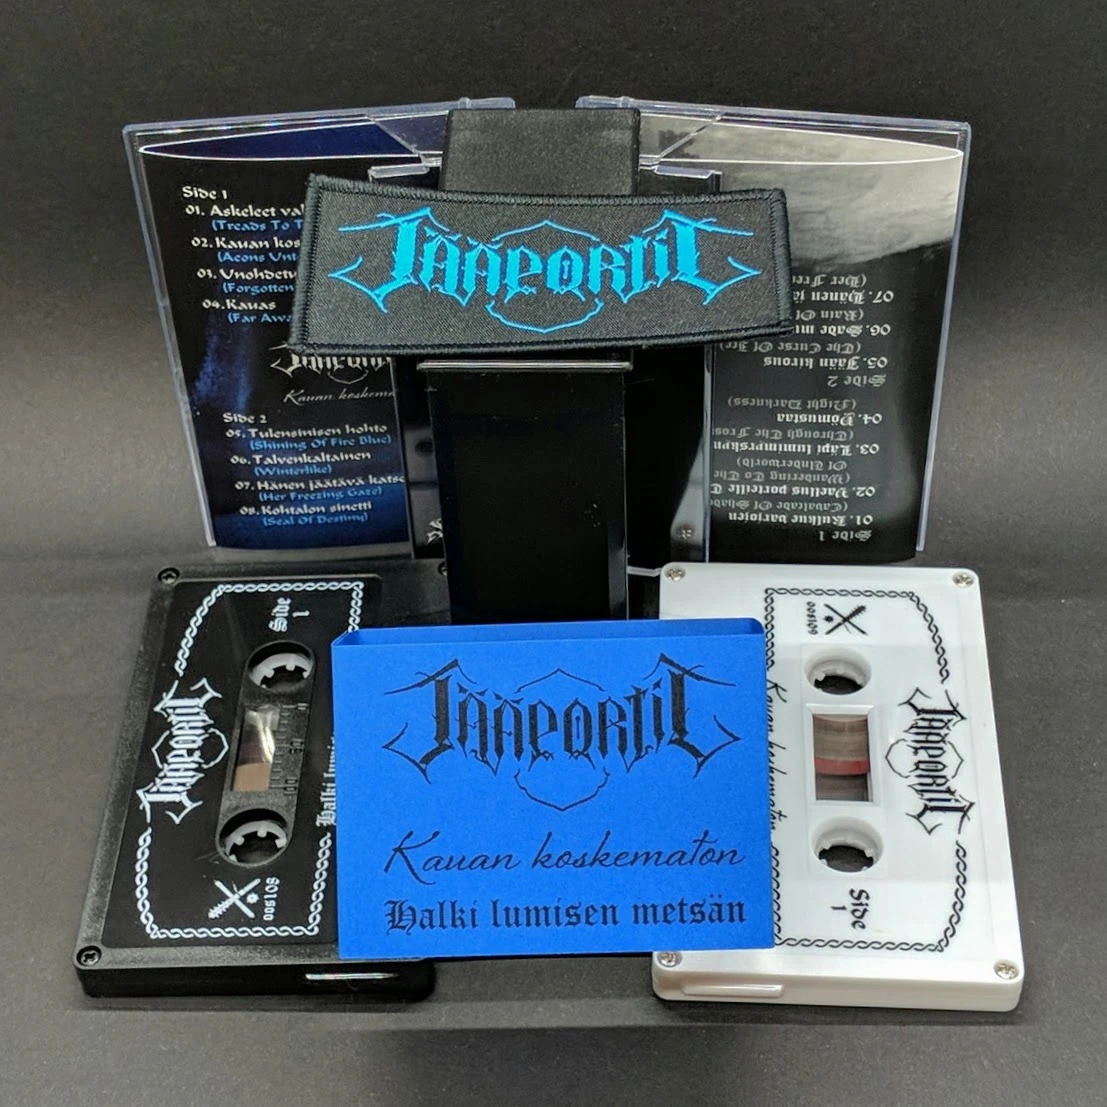 Jääportit Deluxe 2-Tape Set with Patch